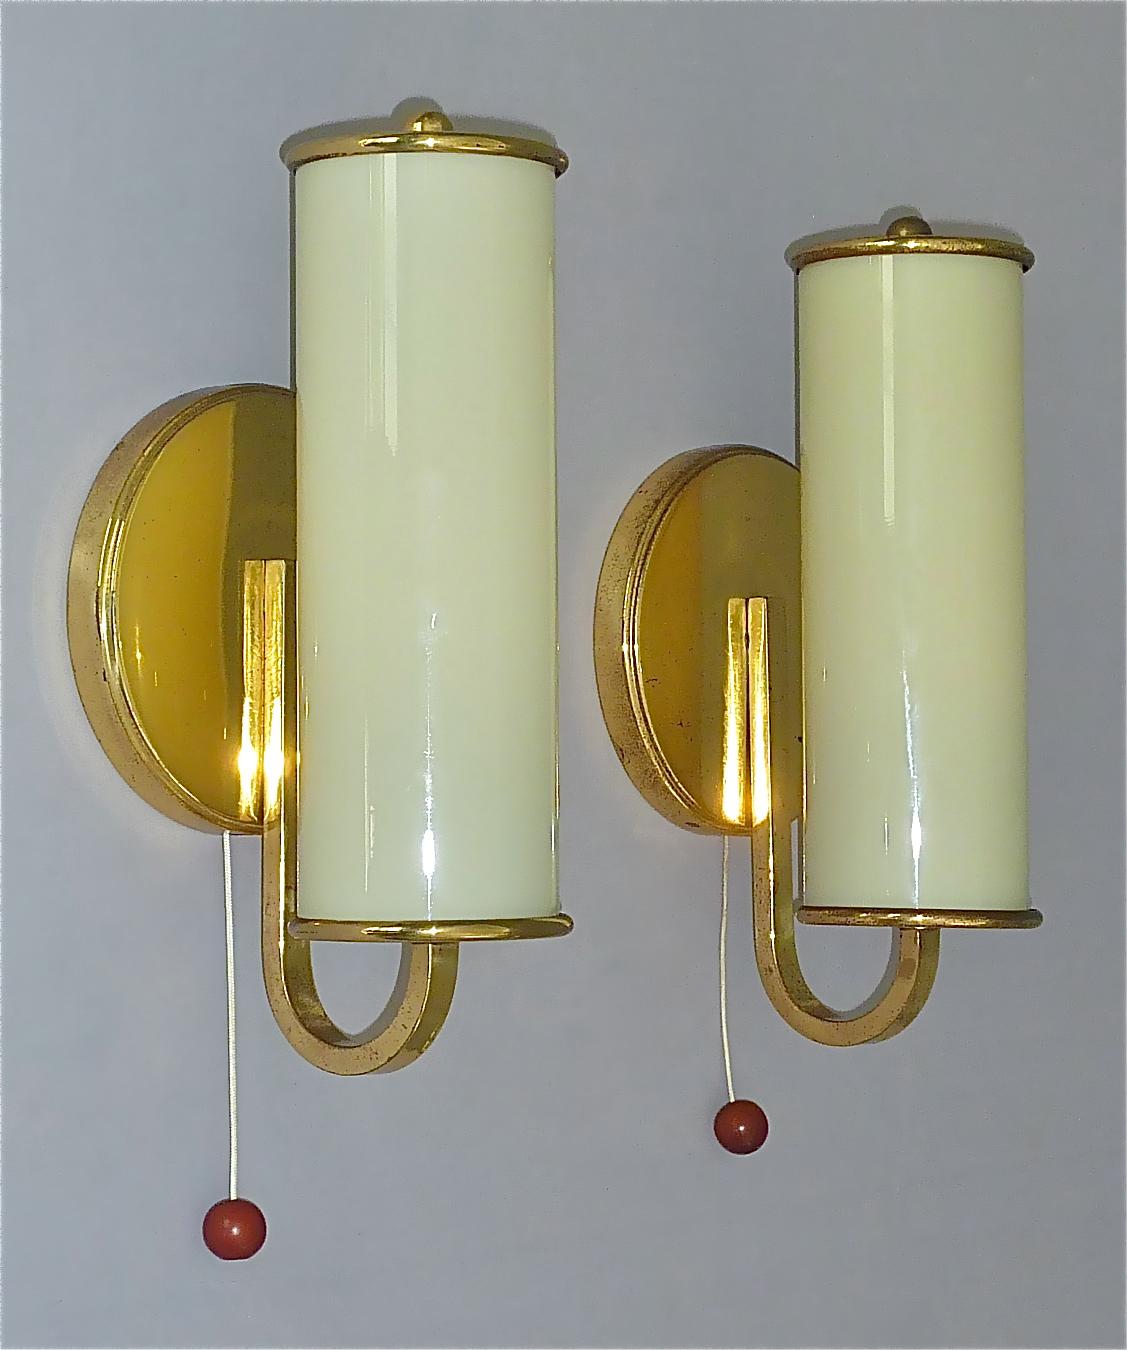 Beautiful german Bauhaus or Scandinavian modernist sconces in Paavo Tynell Taito Oy / Kalmar Style, circa 1930s to 1940s. The wall lights which are made of patinated brass with faint yellow opaline glass tubes and threat-switches with nice amber